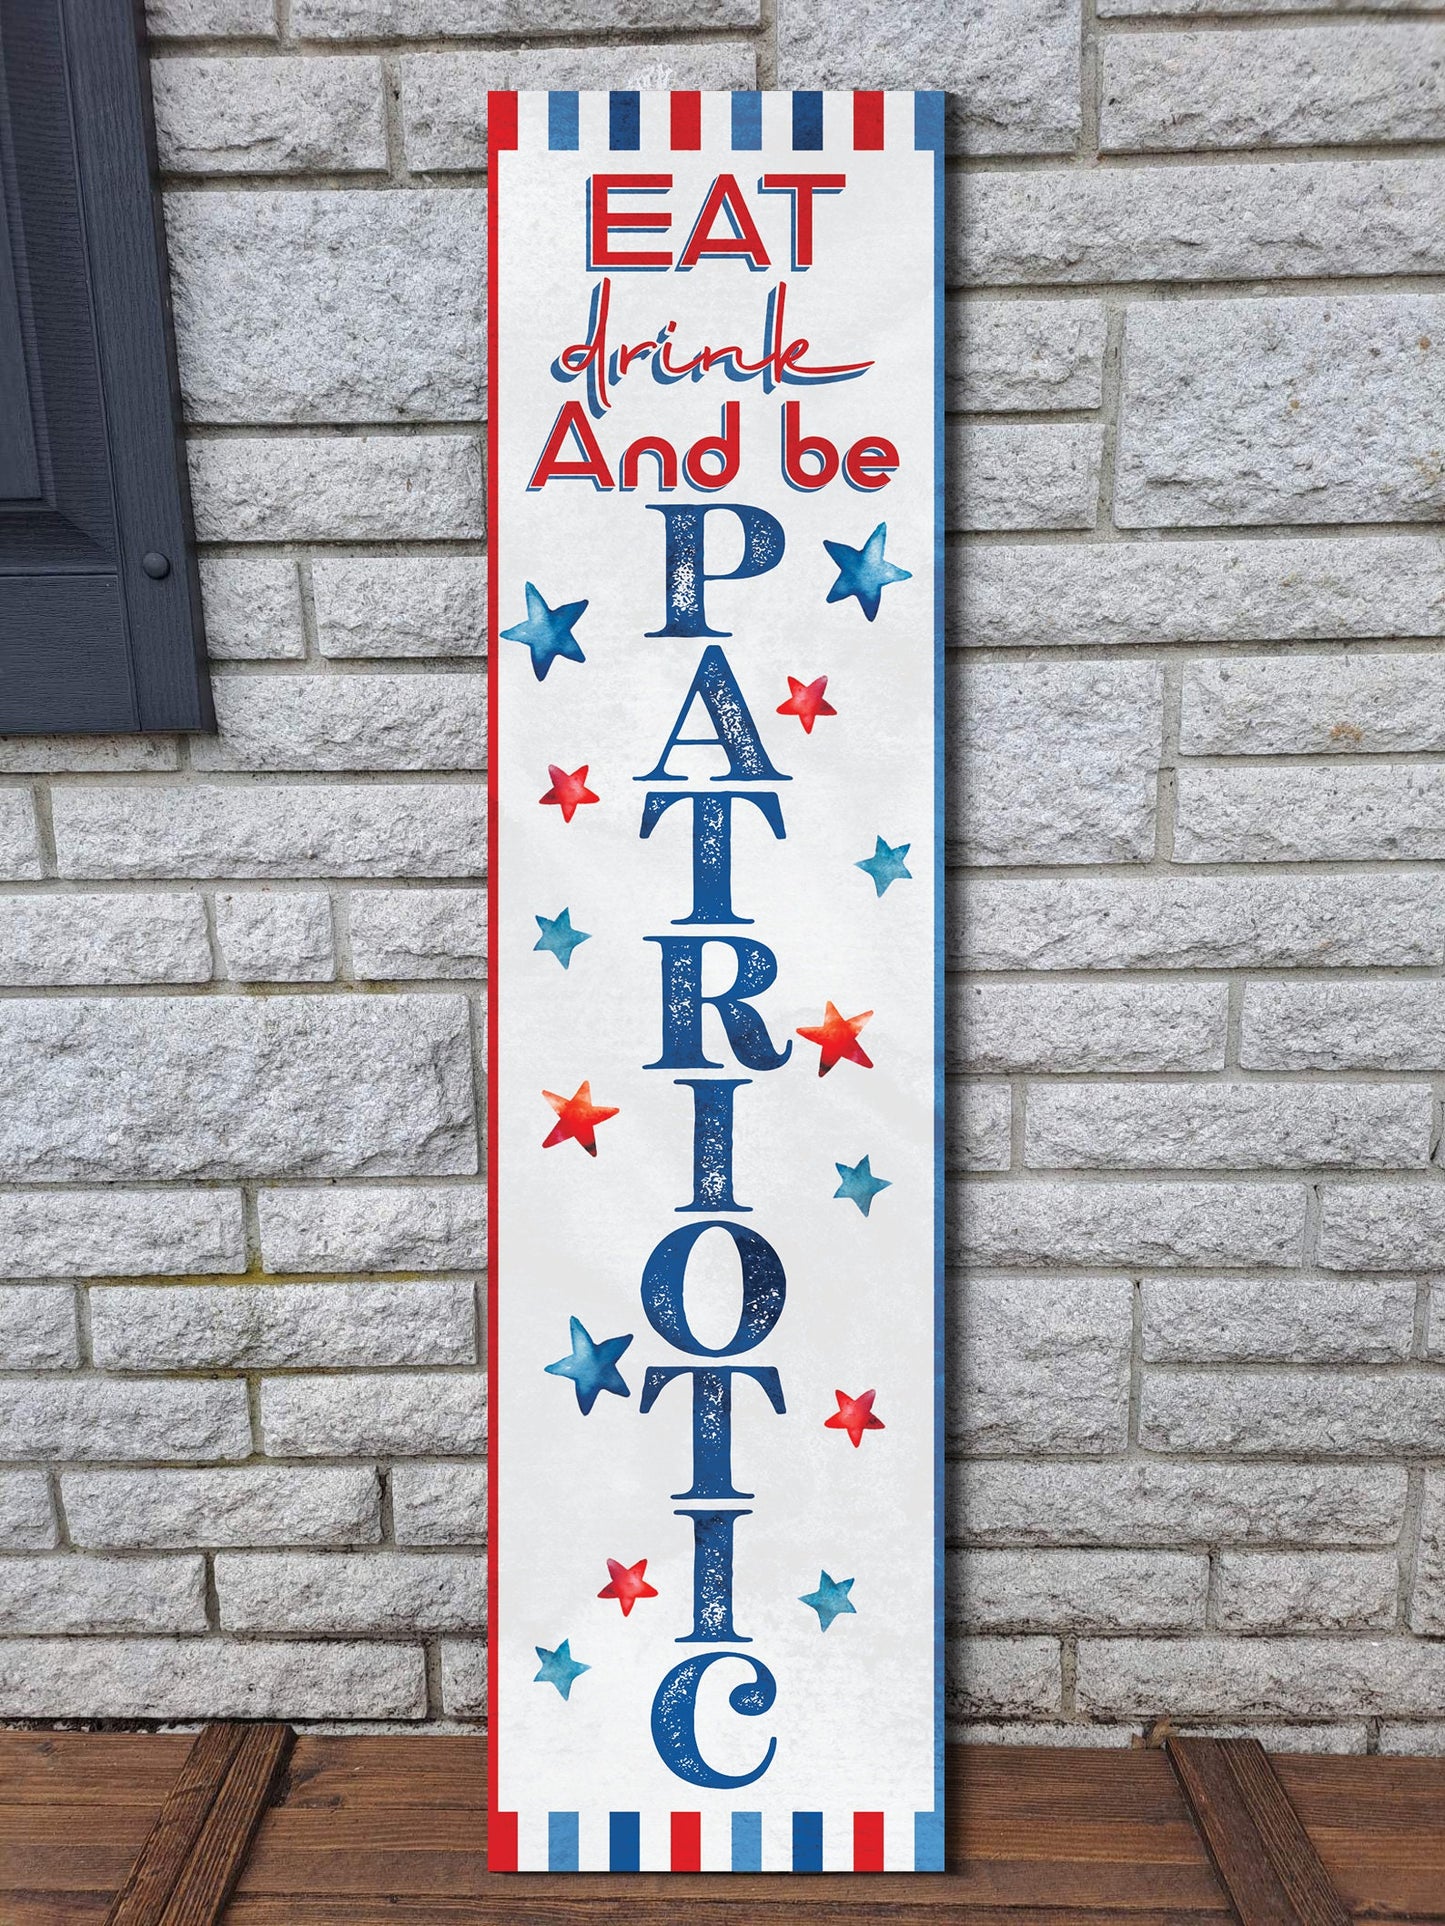 36in 4th of July Eat, Drink, and Be Patriotic Wooden Porch Sign - Festive Outdoor Decoration